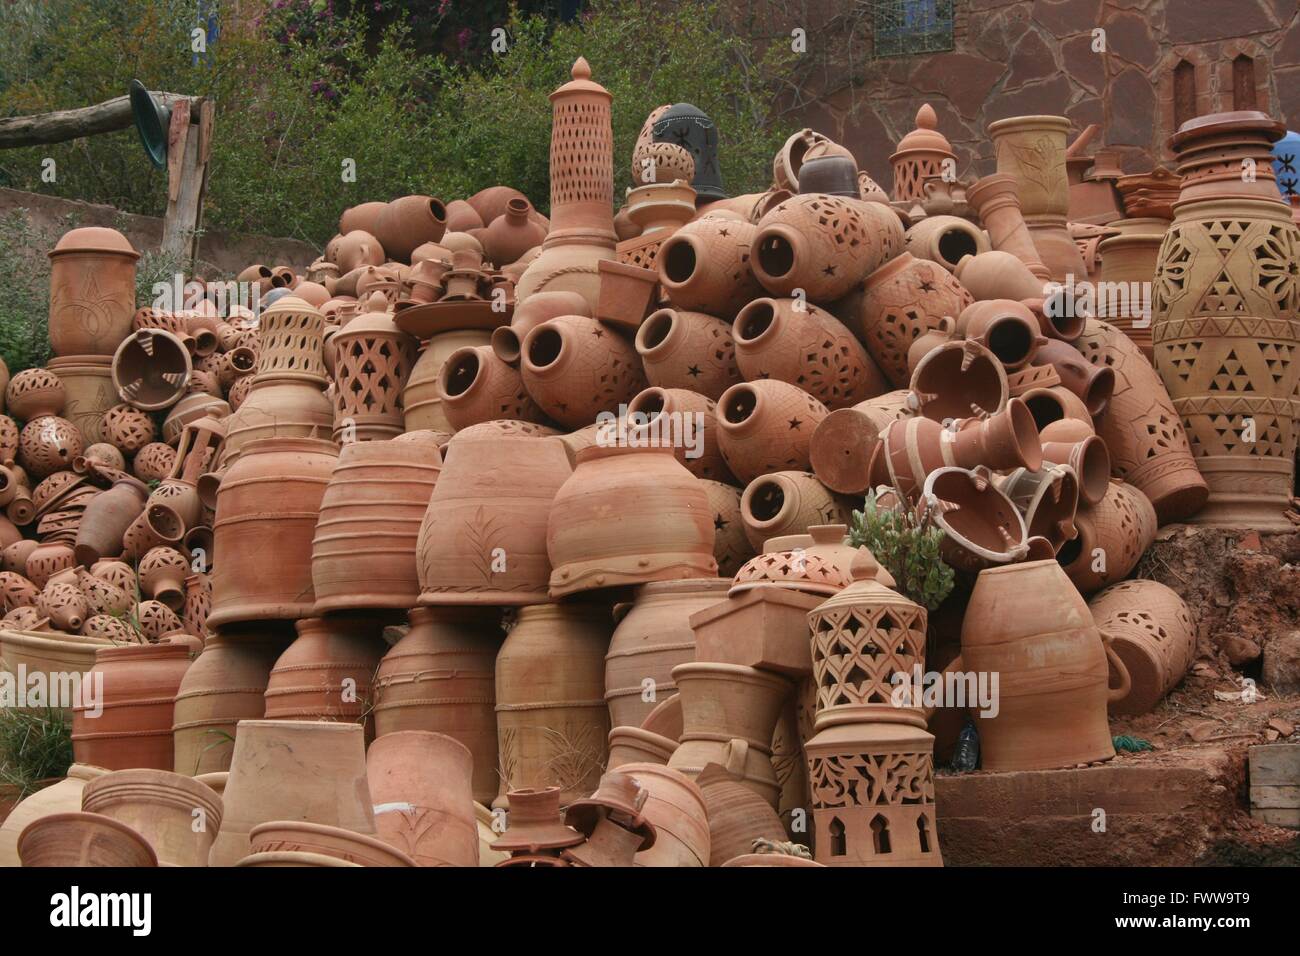 Pots of Pots - for sale in a Berber market Stock Photo